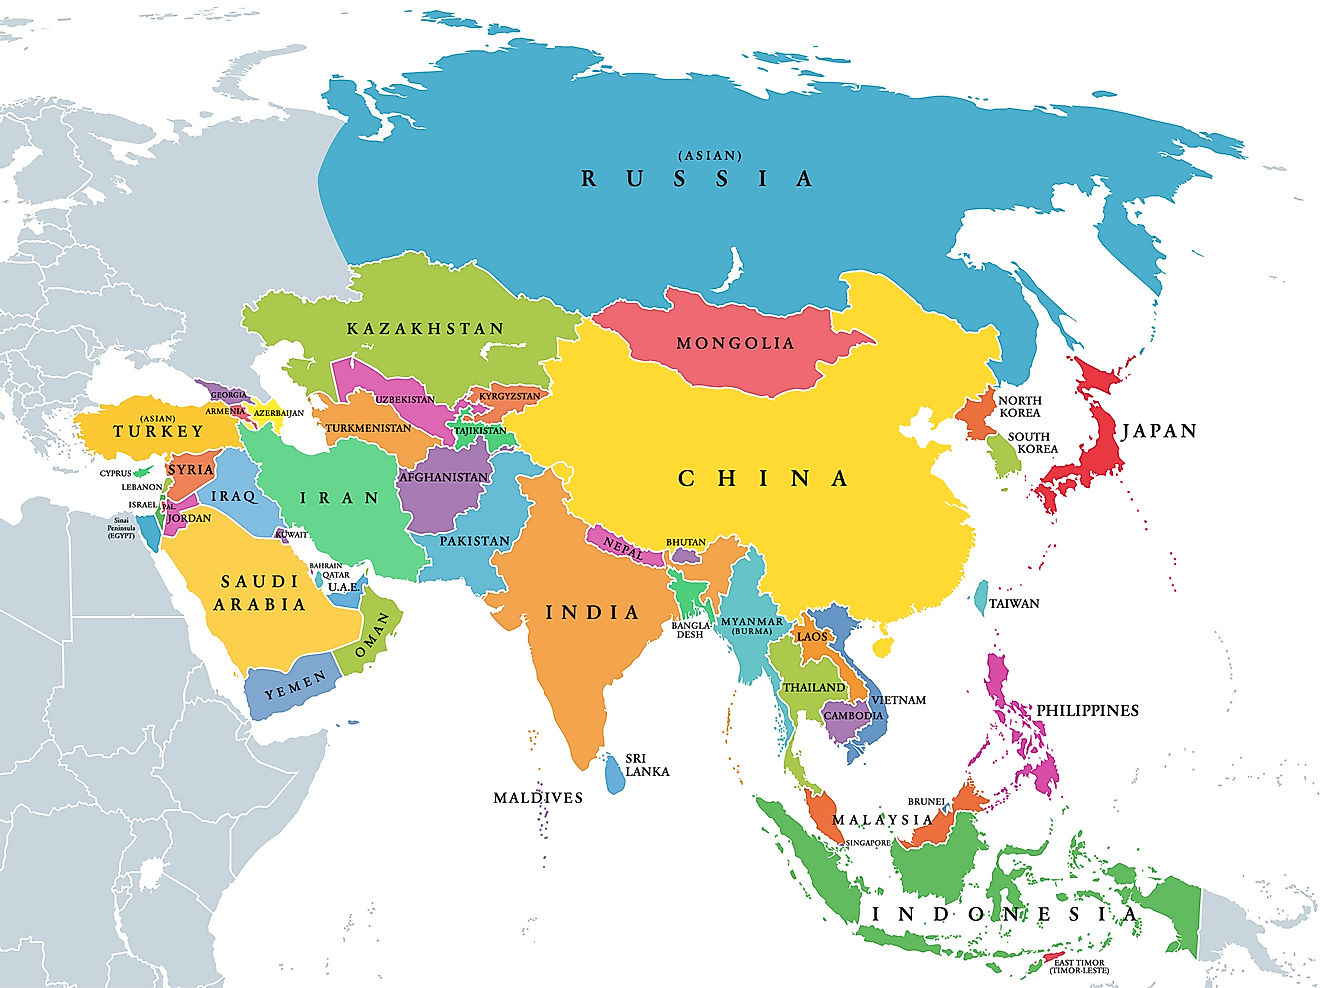 How Many Countries Are There In Asia? - WorldAtlas